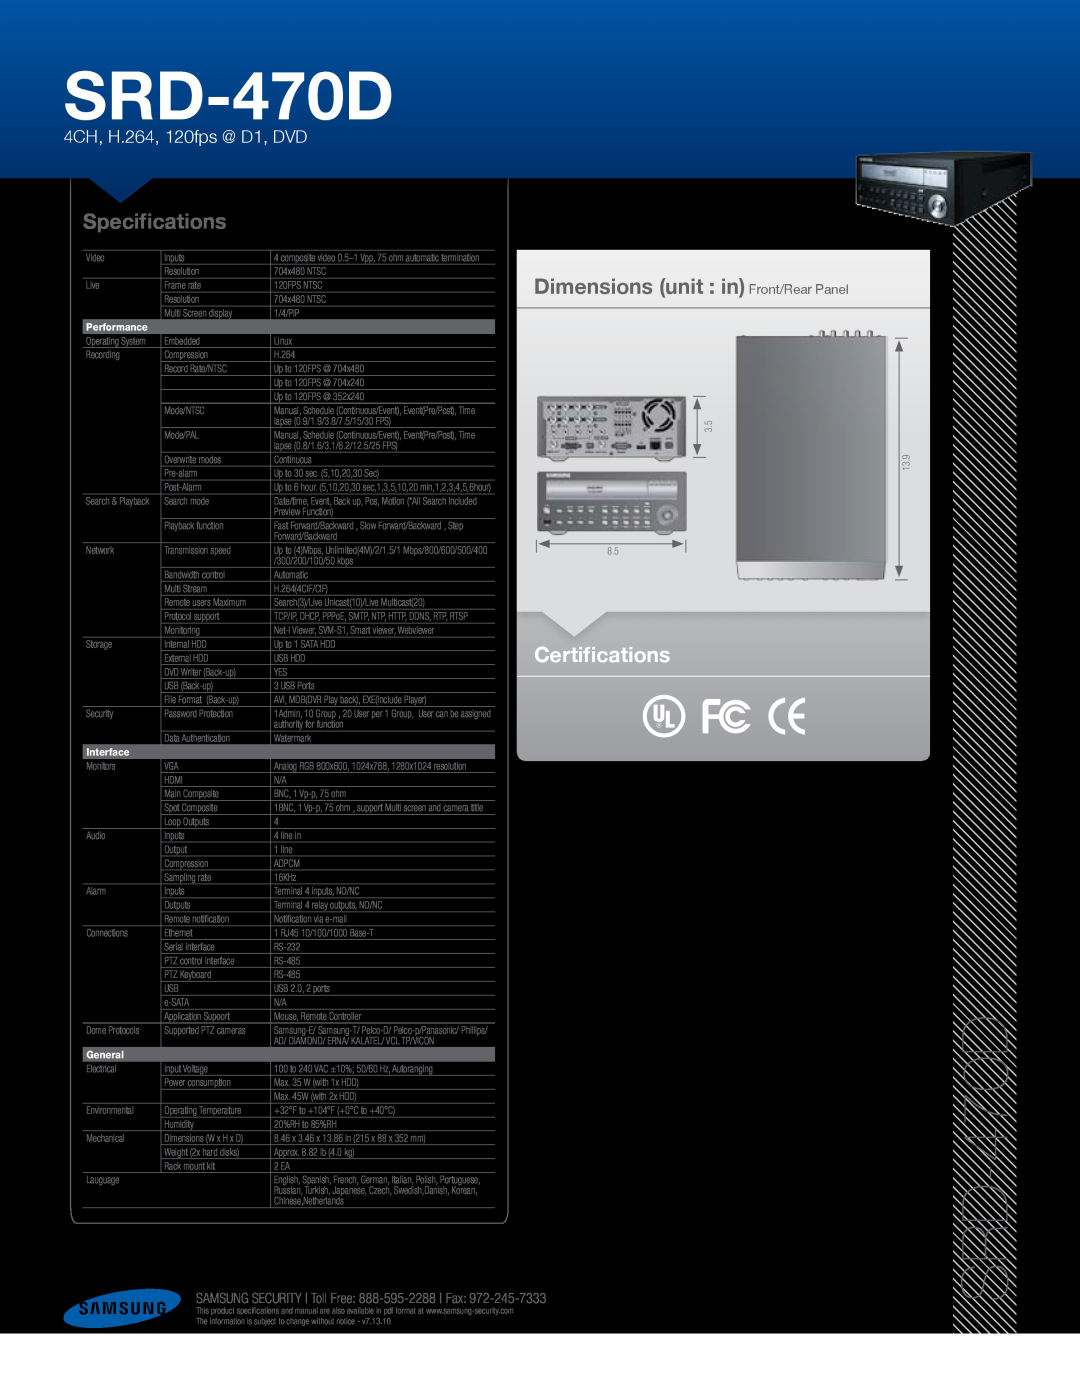 Samsung SRD-470D Specifications, Dimensions unit in Front/Rear Panel, Certifications, 4CH, H.264, 120fps @ D1, DVD 